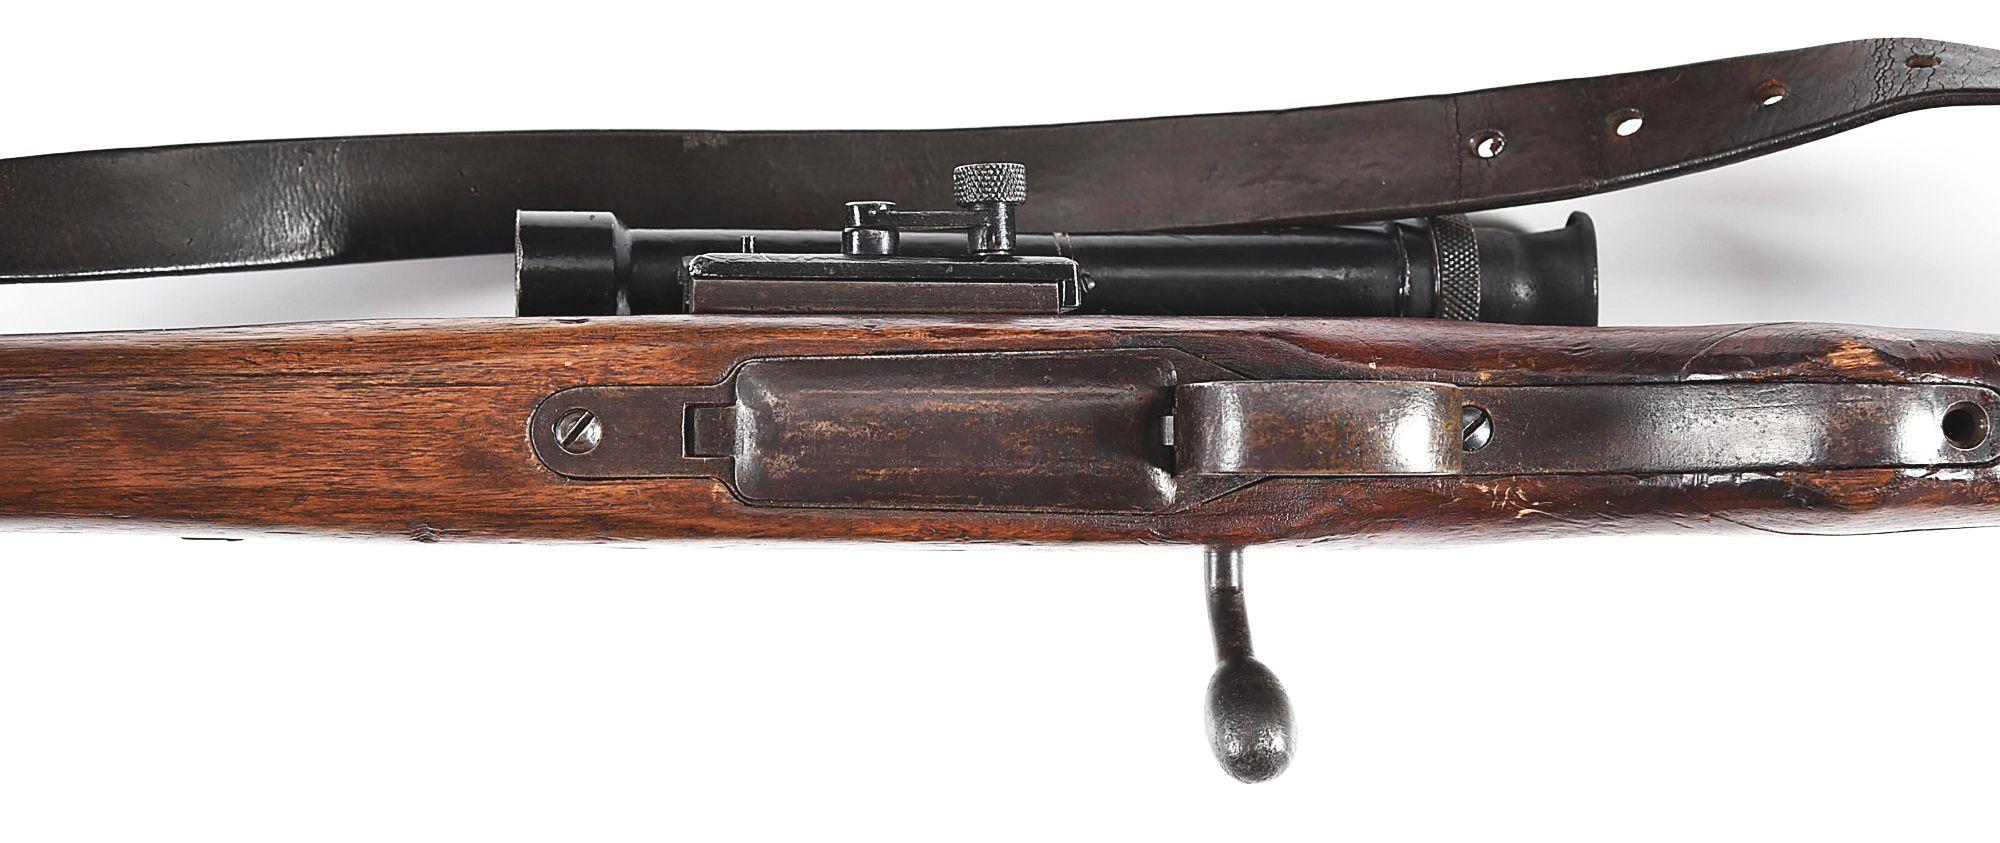 (C) SCARCE AND DESIRABLE NAGOYA TYPE 99 BOLT ACTION SNIPER RIFLE.